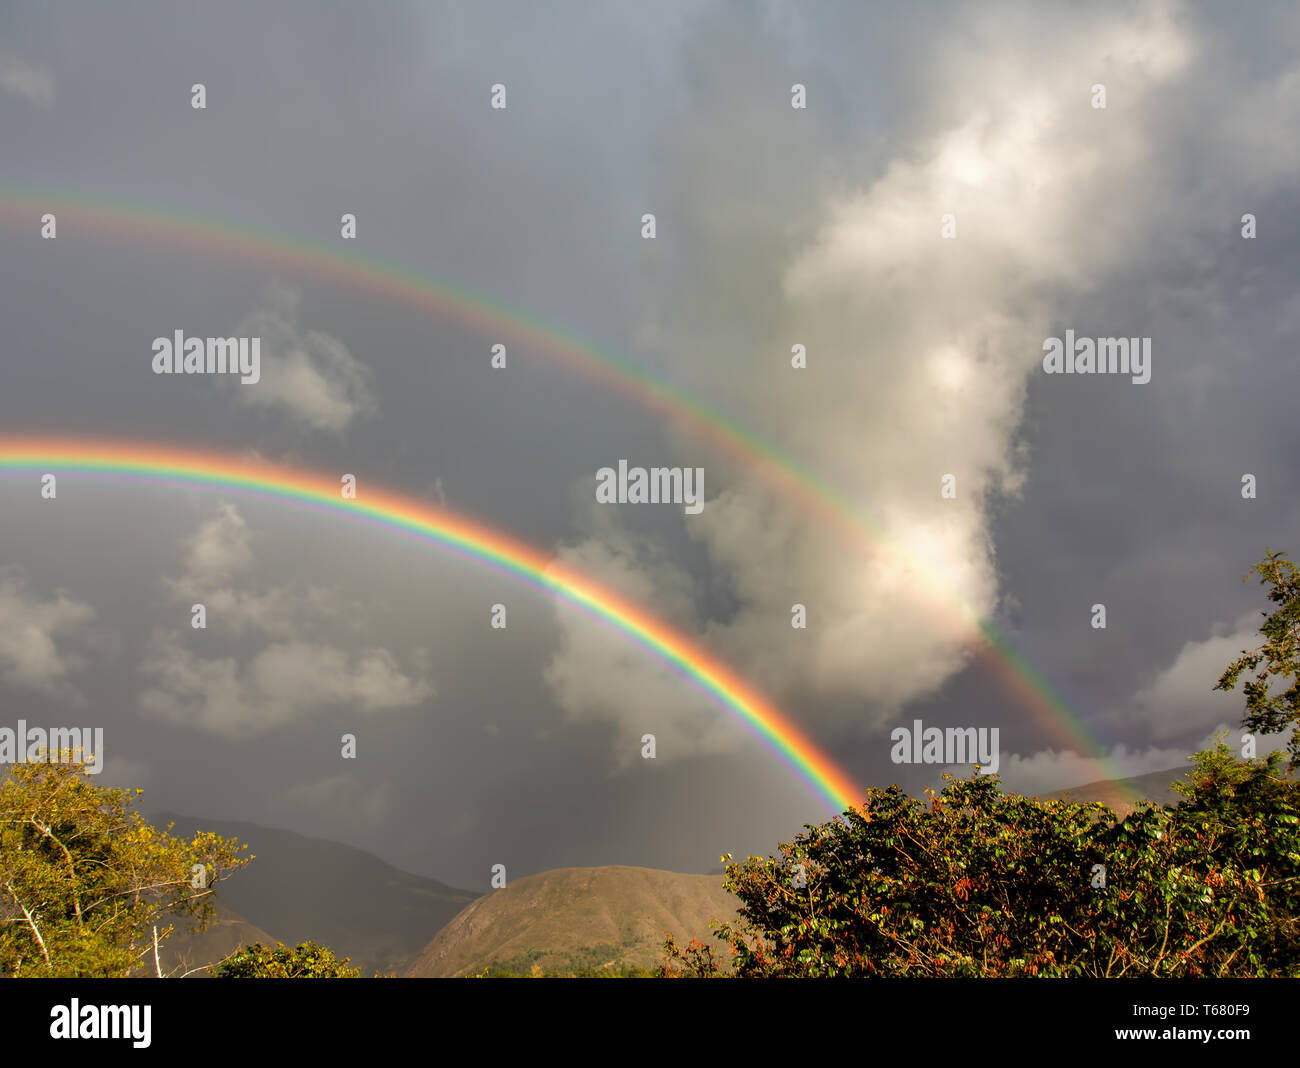 Landscape with two rainbows on a stormy sky. Captured at the Andean mountains of central Colombia. Stock Photo